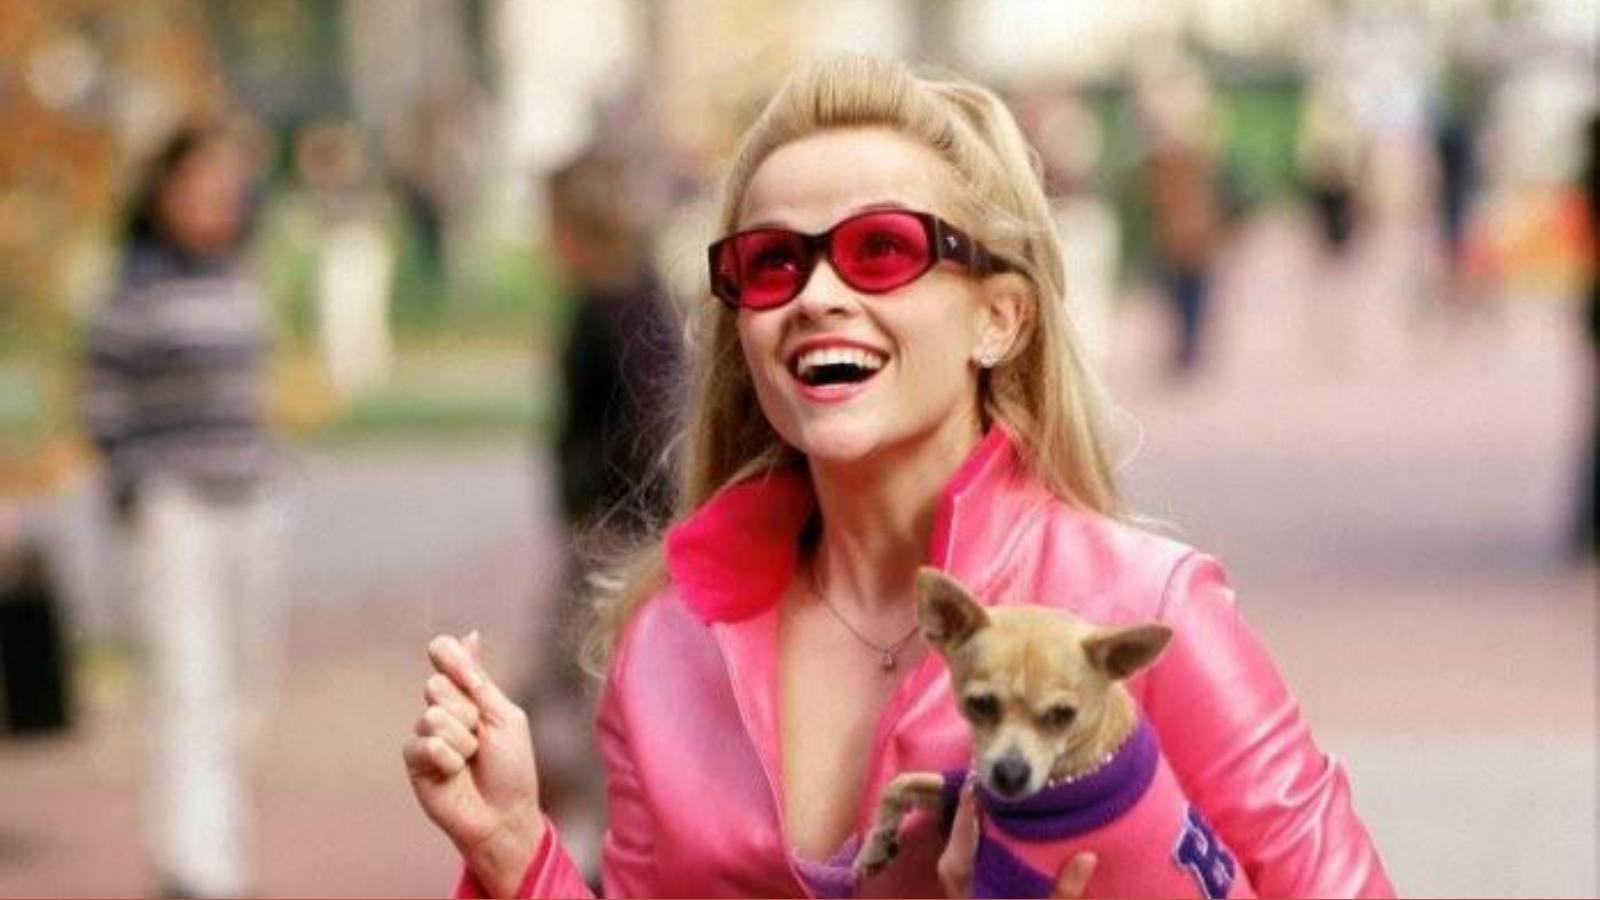 Reese Witherspoon in Legally Blonde as Elle Woods, fighting against the 'Dumb Blonde' bias